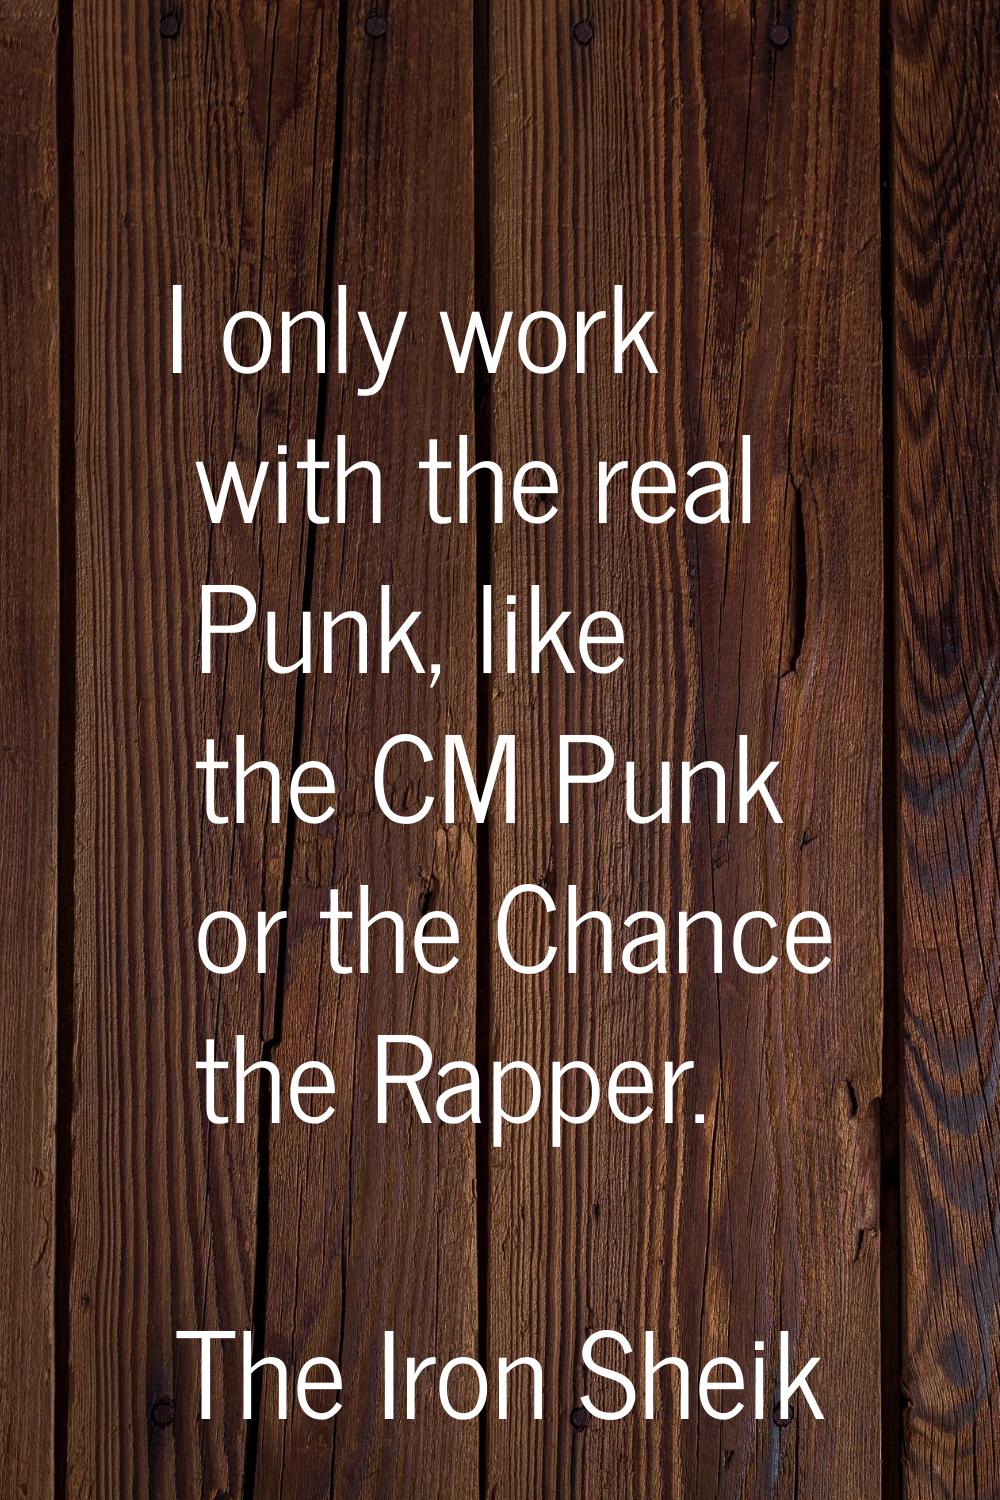 I only work with the real Punk, like the CM Punk or the Chance the Rapper.